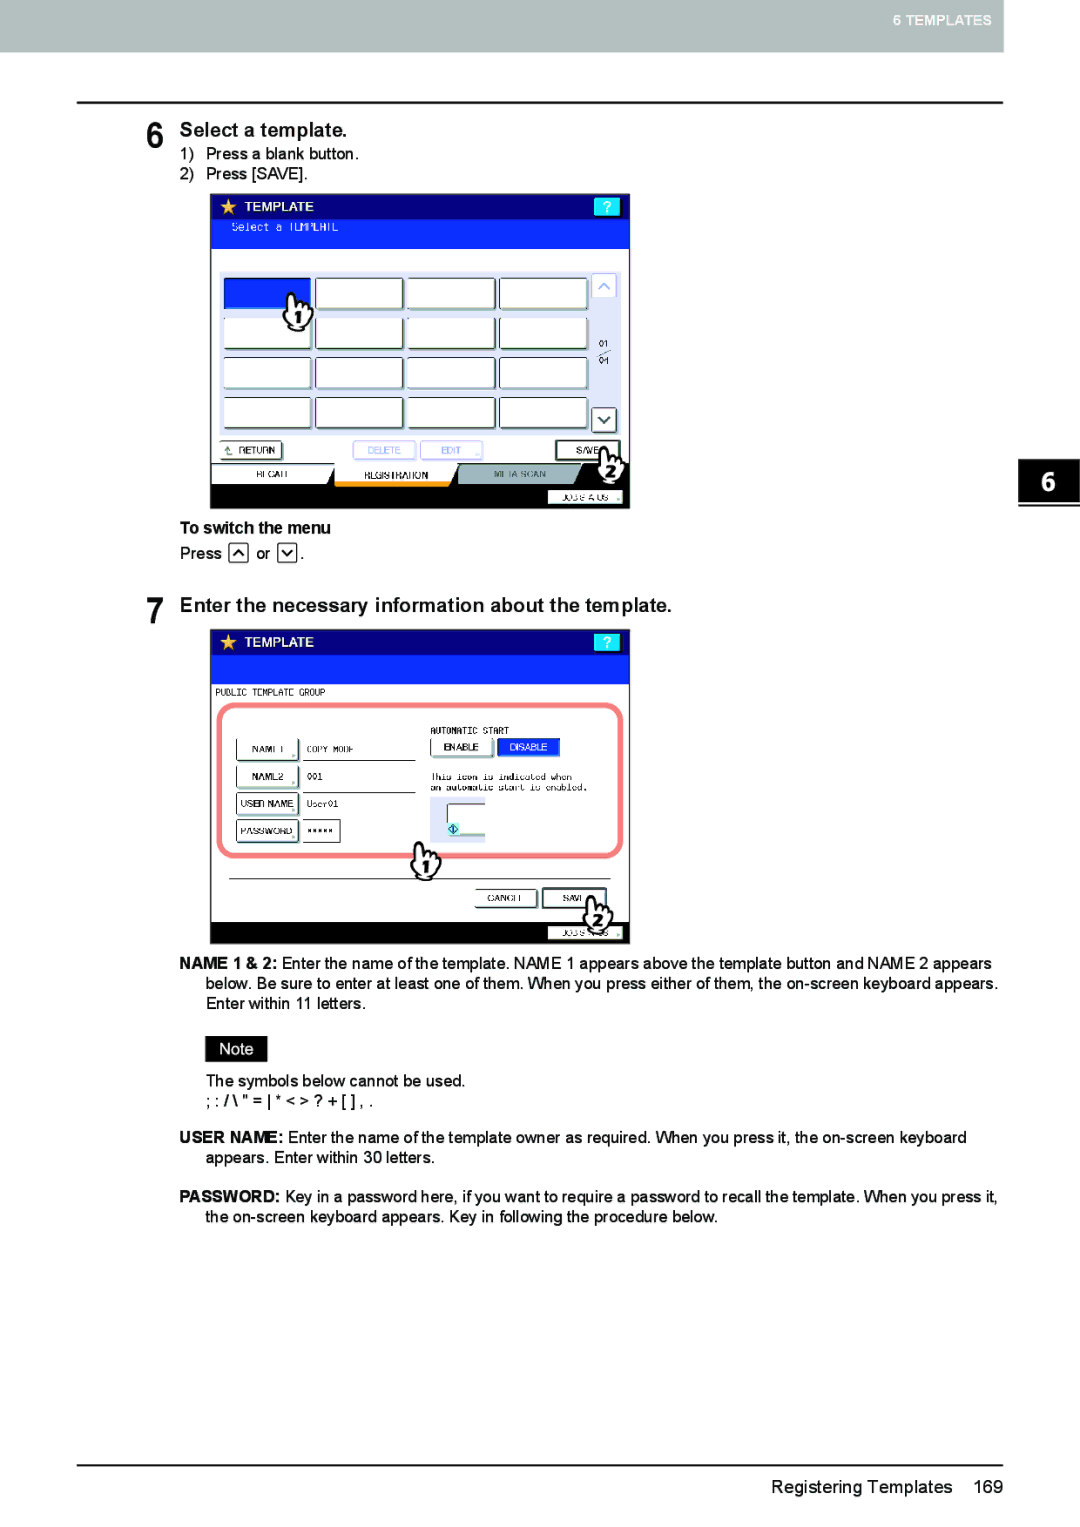 Toshiba e-STUDIO5520C, 6520c Select a template, Enter the necessary information about the template, To switch the menu 